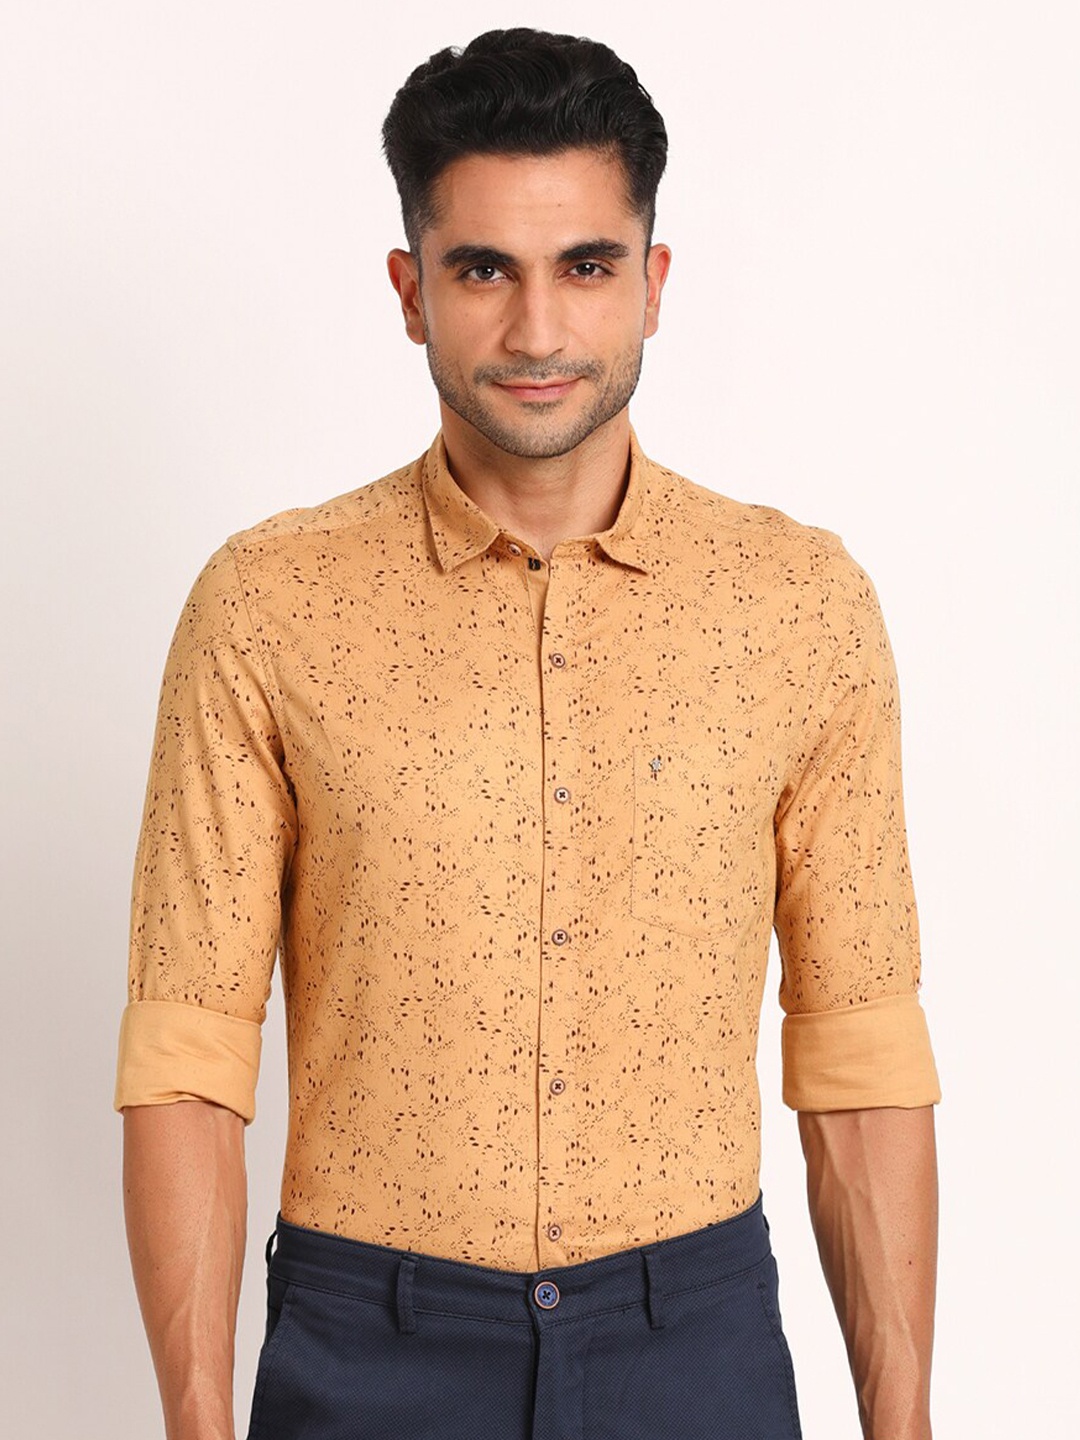 

Turtle Relaxed Slim Fit Long Sleeves Spread Collar Cotton Opaque Printed Casual Shirt, Mustard